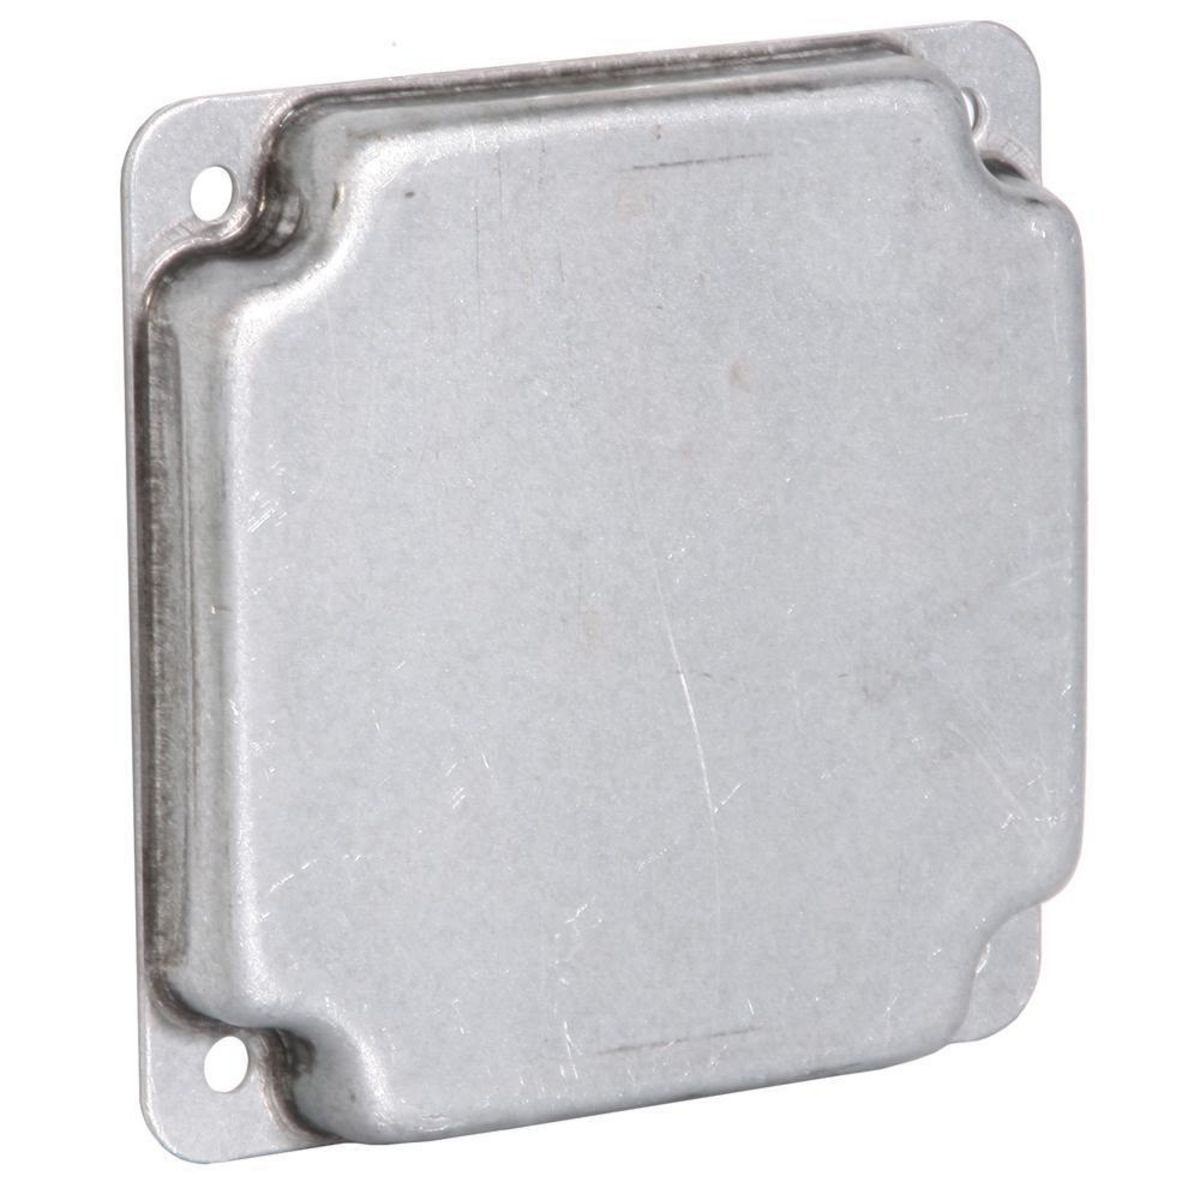 4-Inch Hubbell-Raco 804C 1/2-Inch Raised Blank Square Cover 